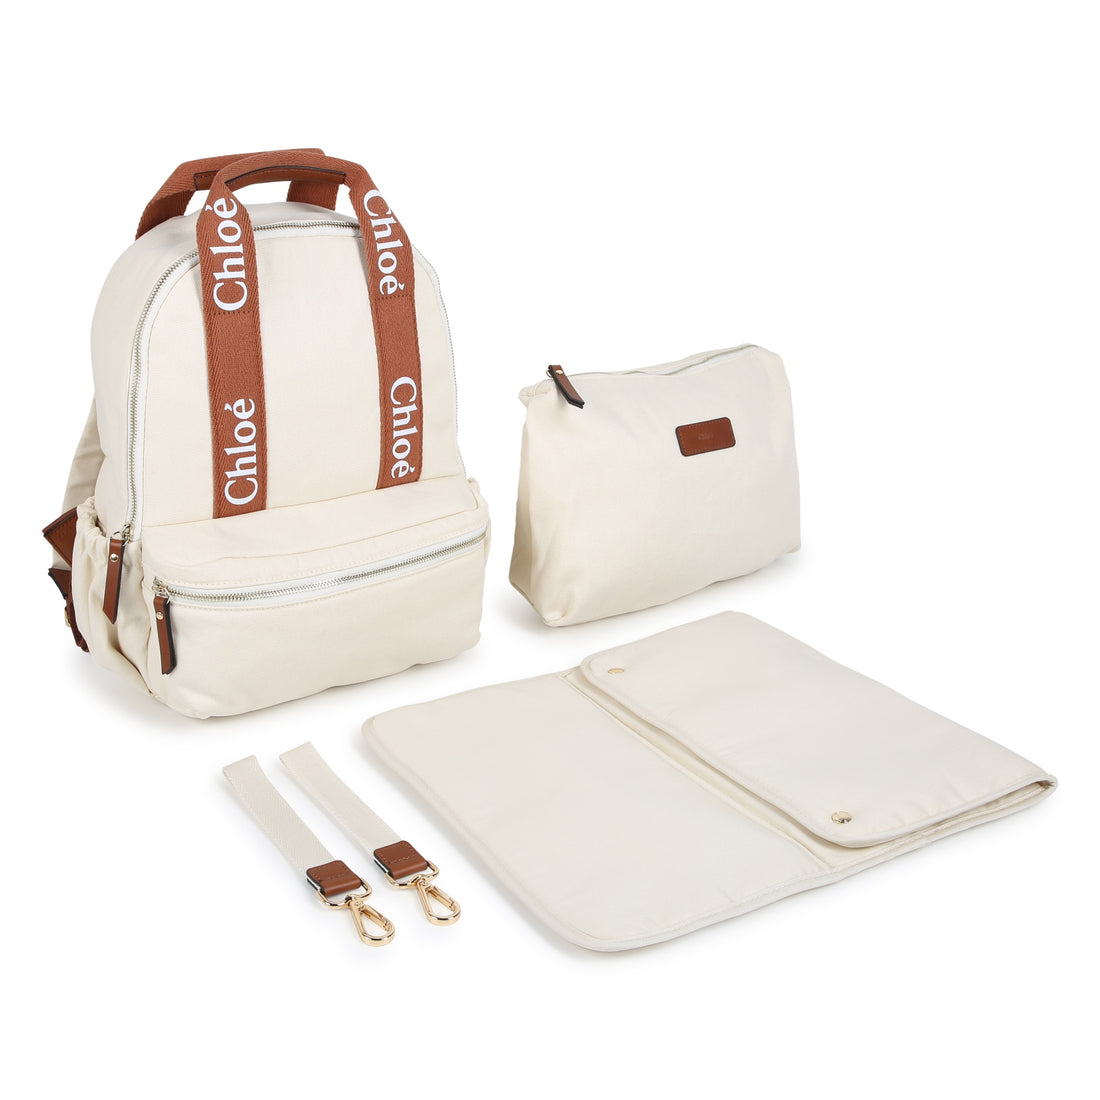 Chloe Changing Bag - Stylish and Practical for Modern Parents | Schools Out